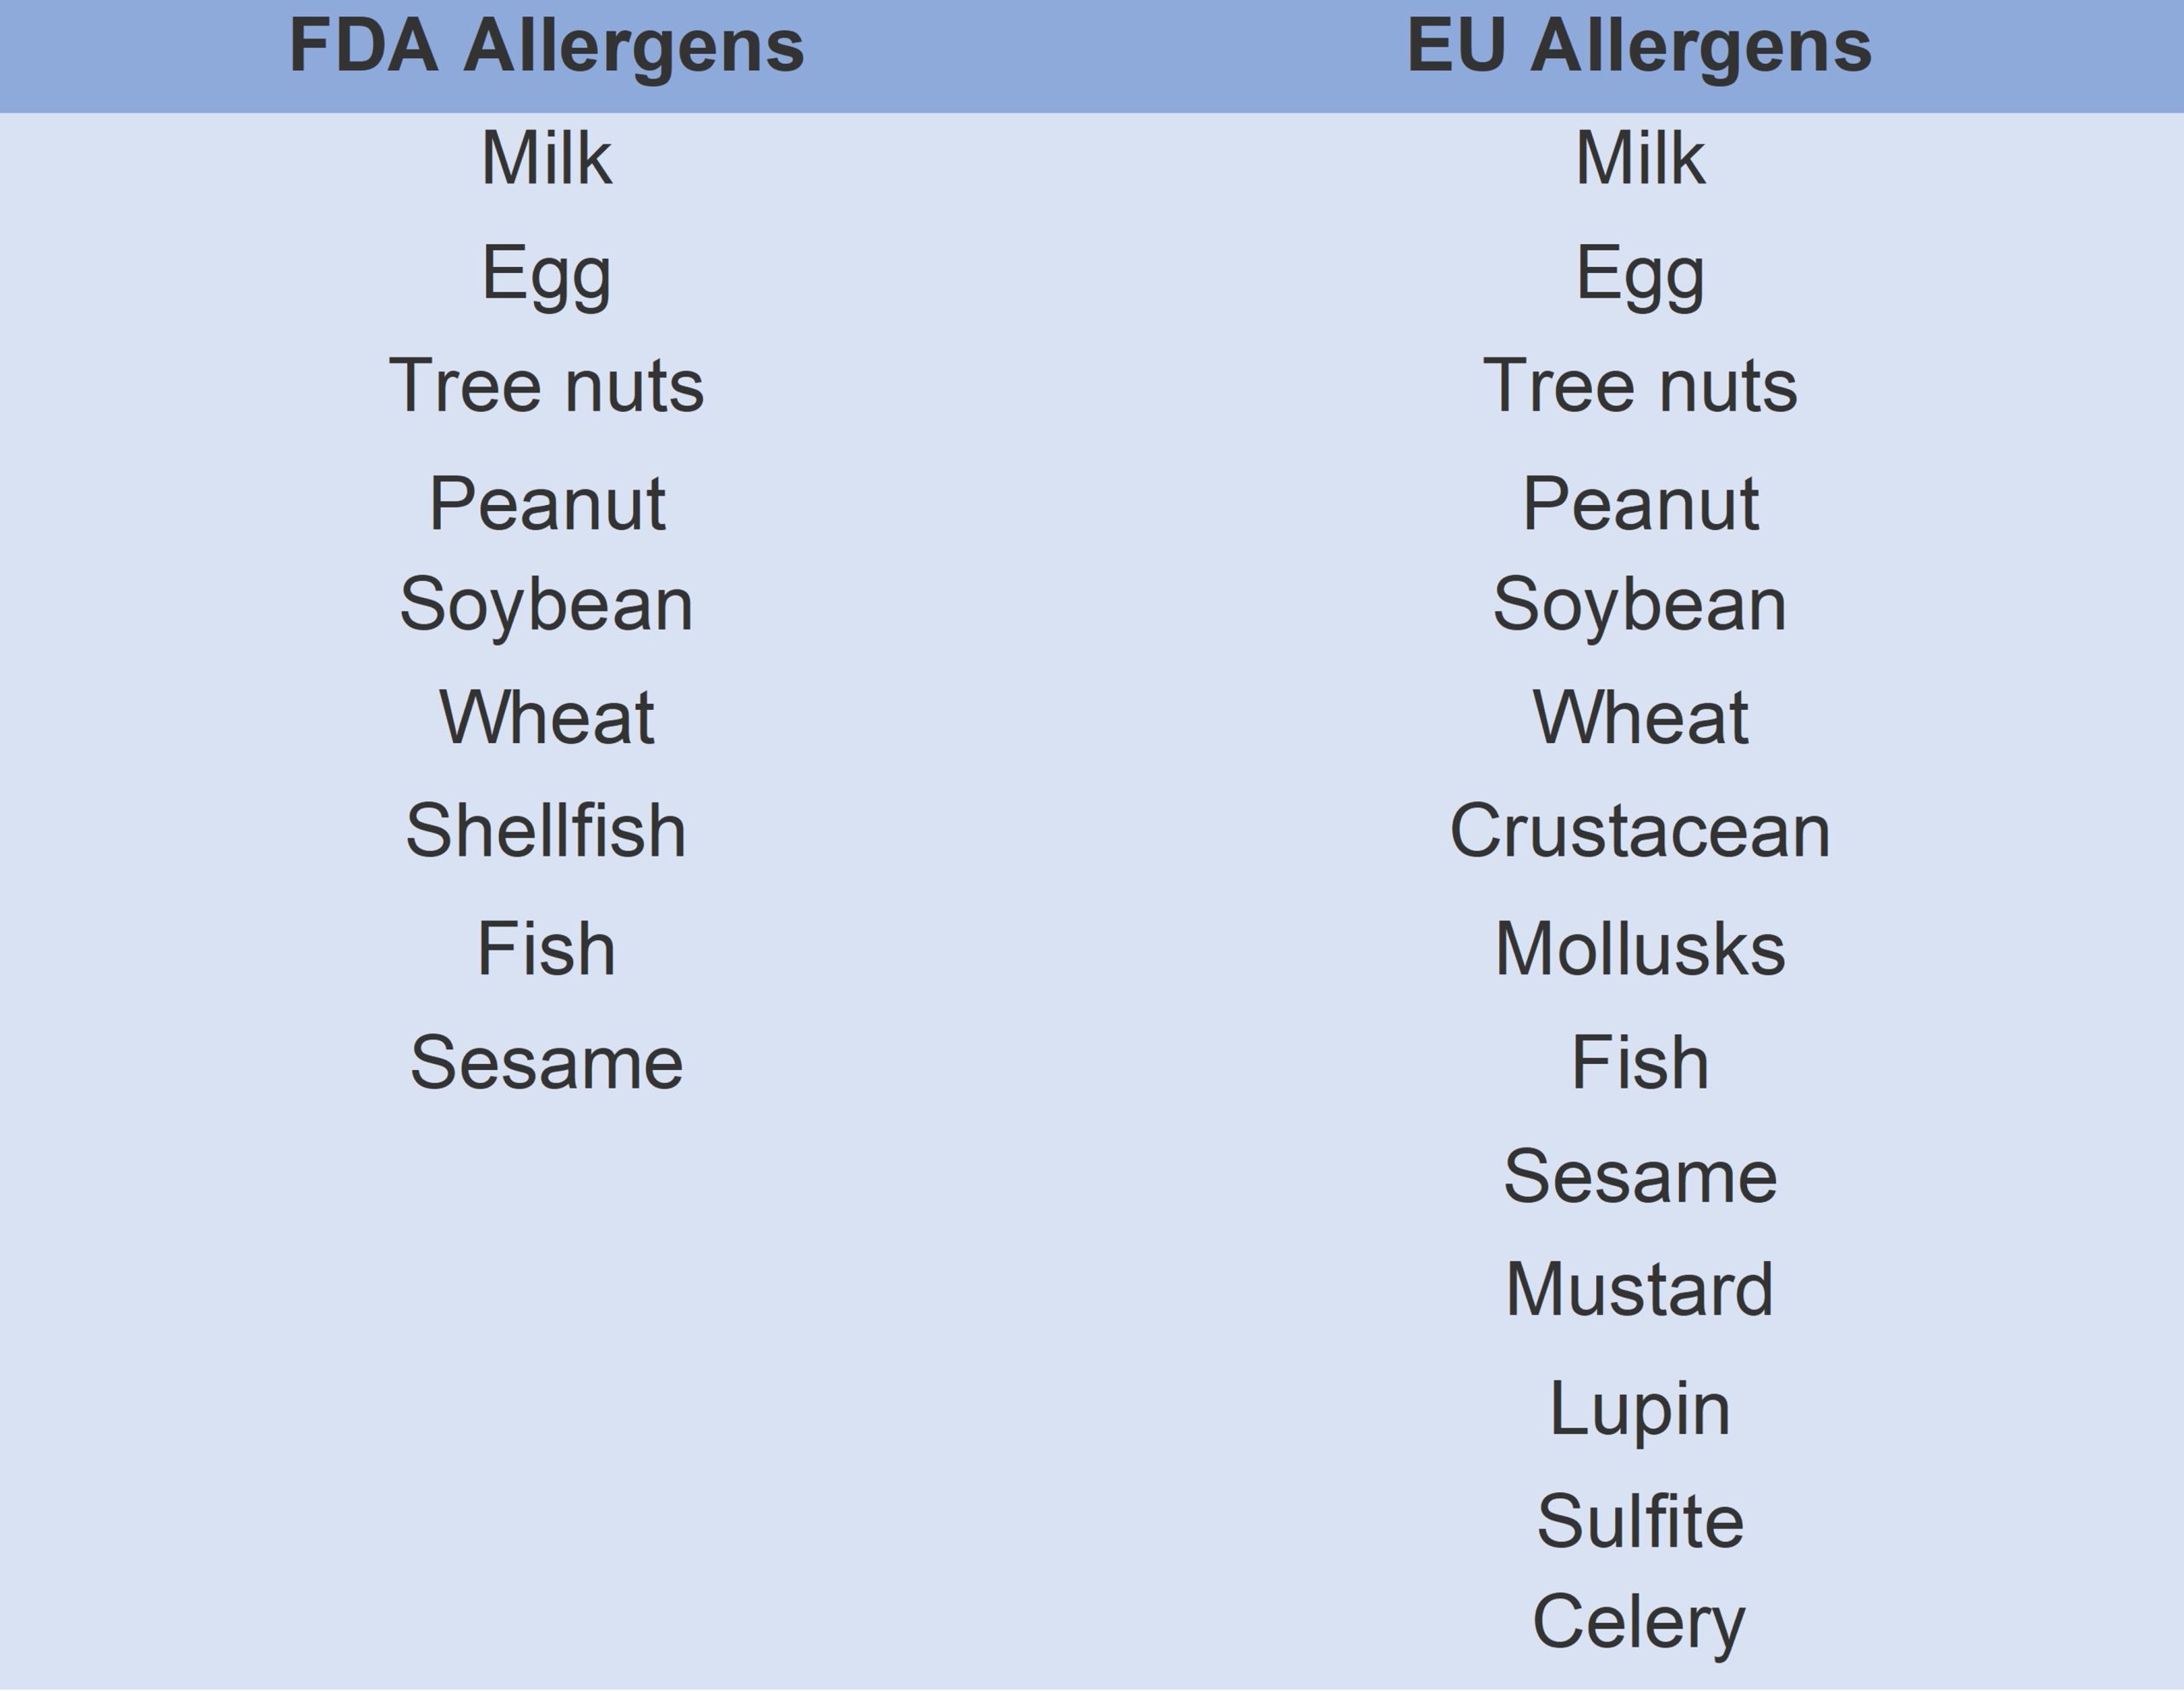 The allergens regulated by the FDA and EU.